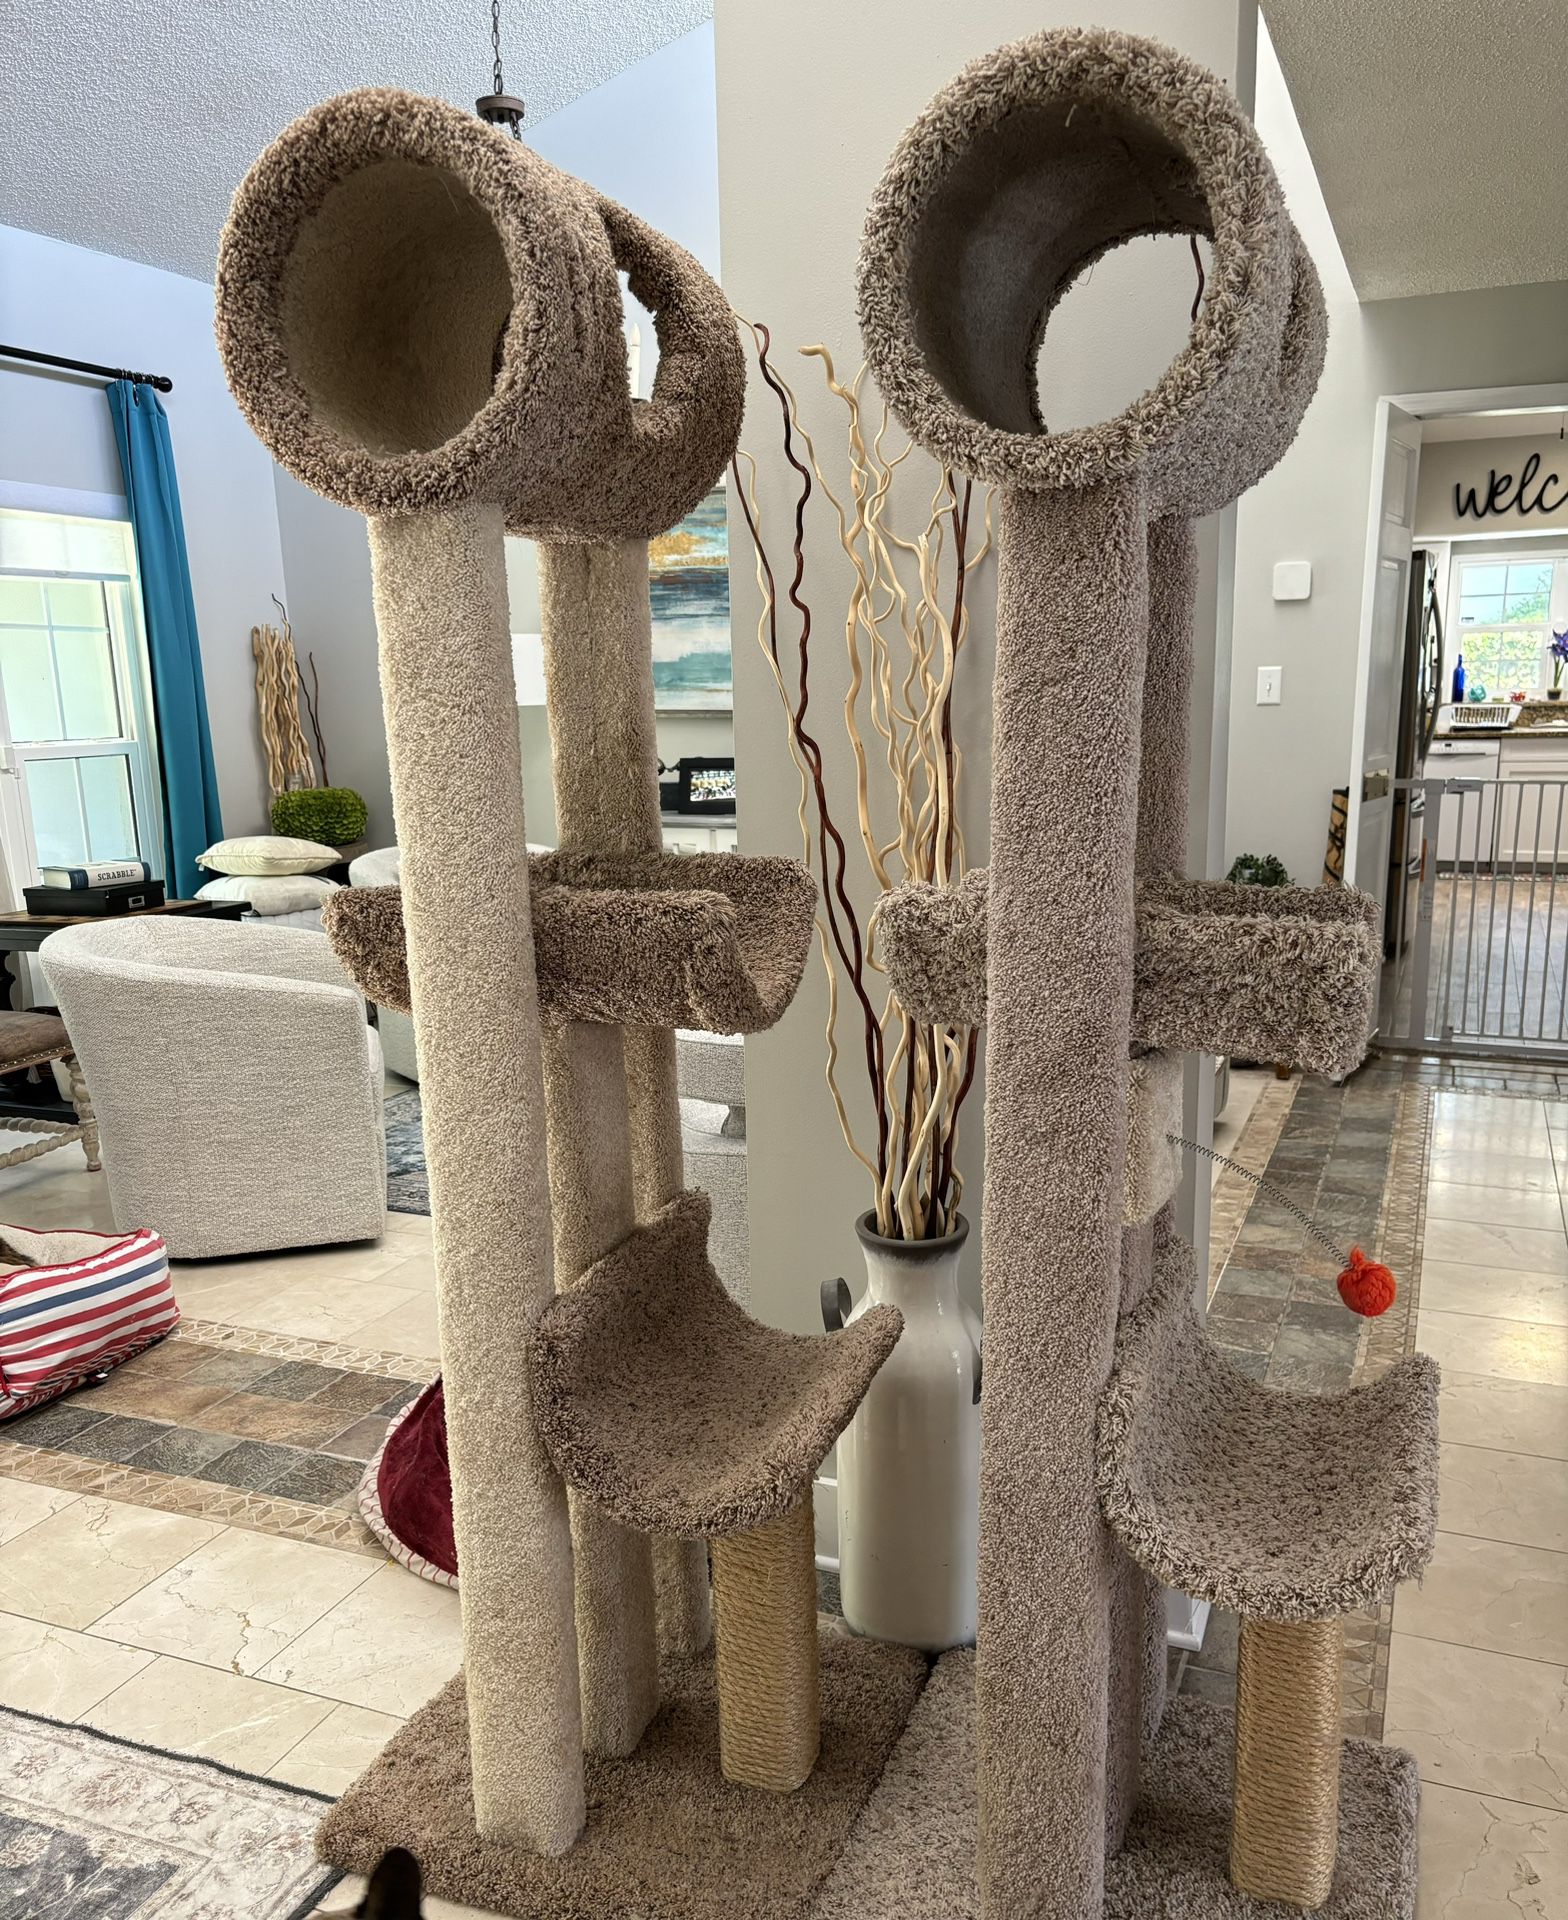  2 KITTY-CAT TOWERS